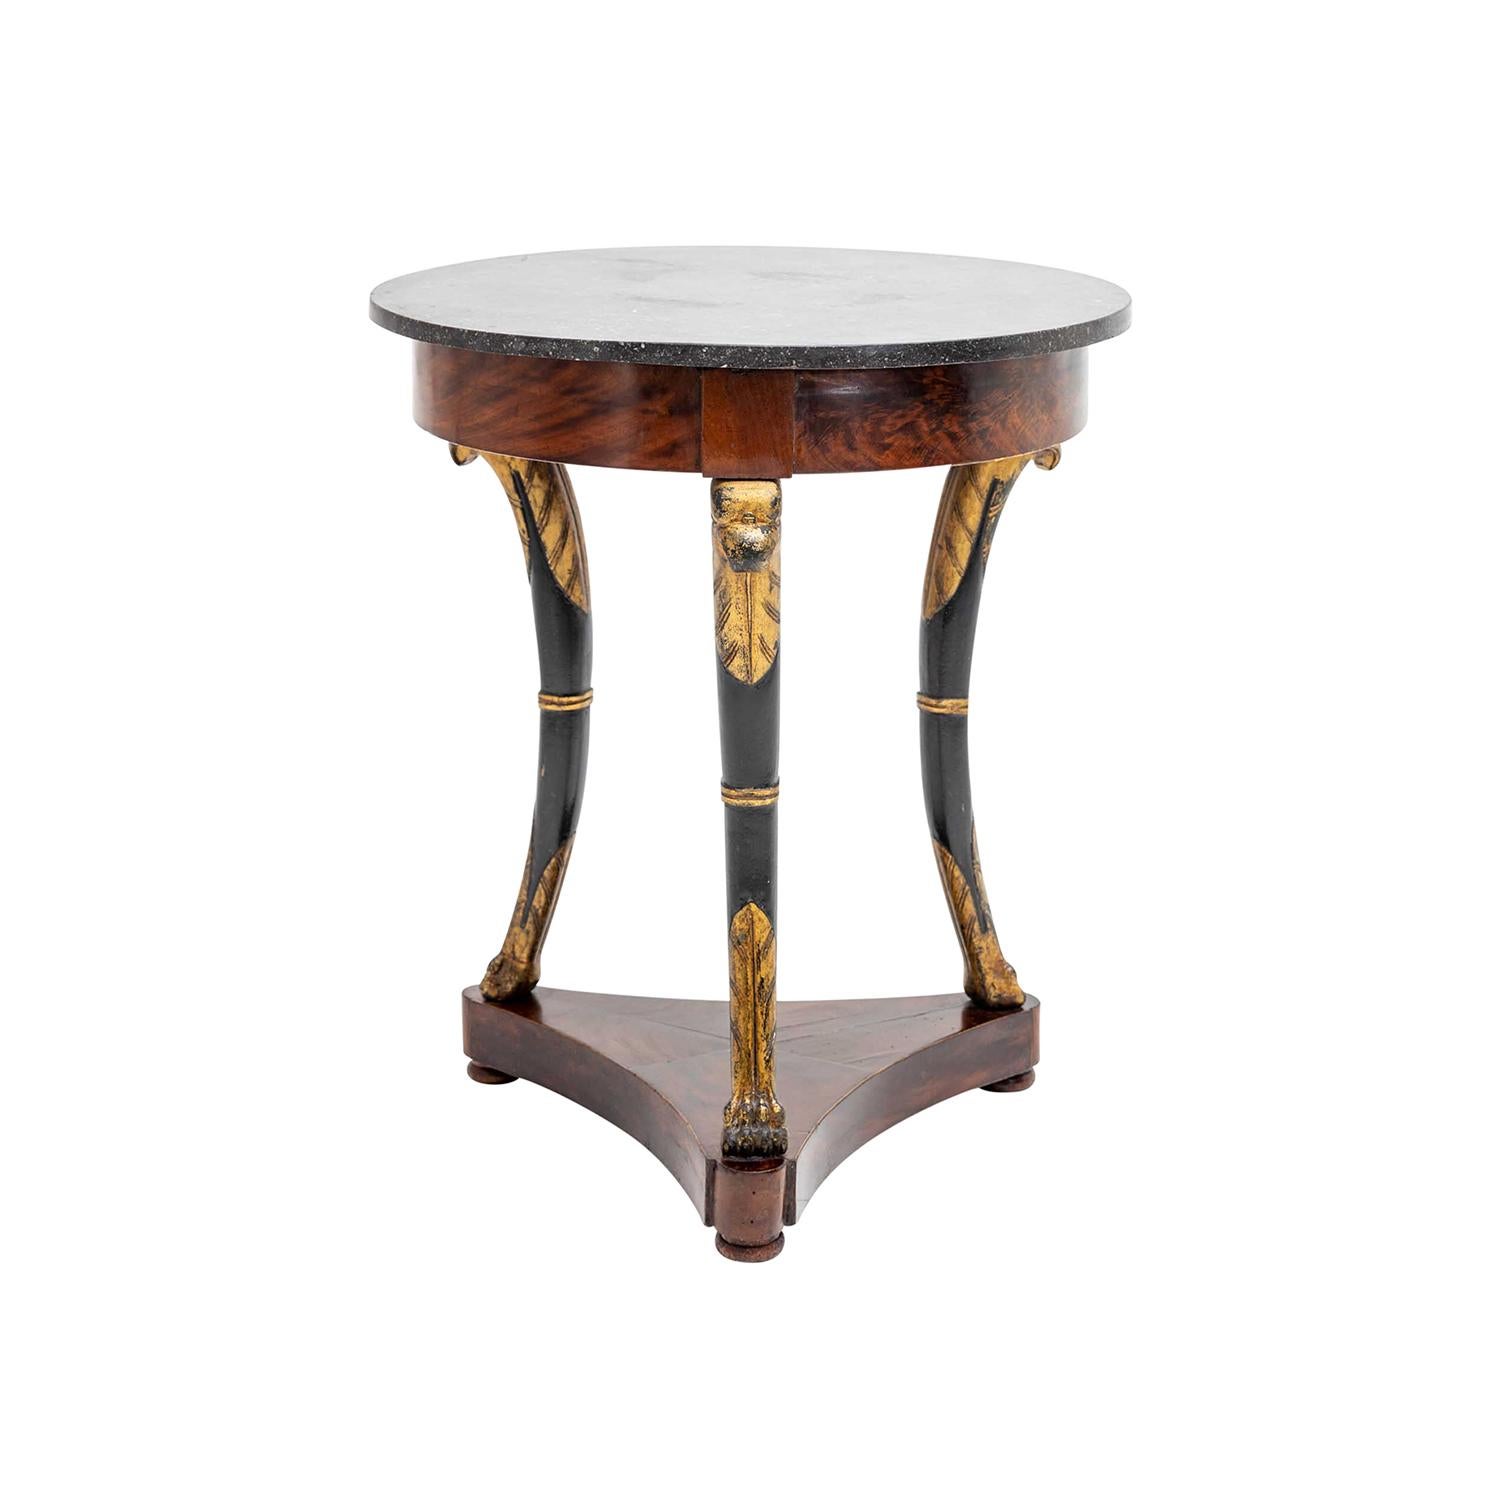 20th Century 19th Century French Empire Round Mahogany Side Table - Antique Marble Table For Sale